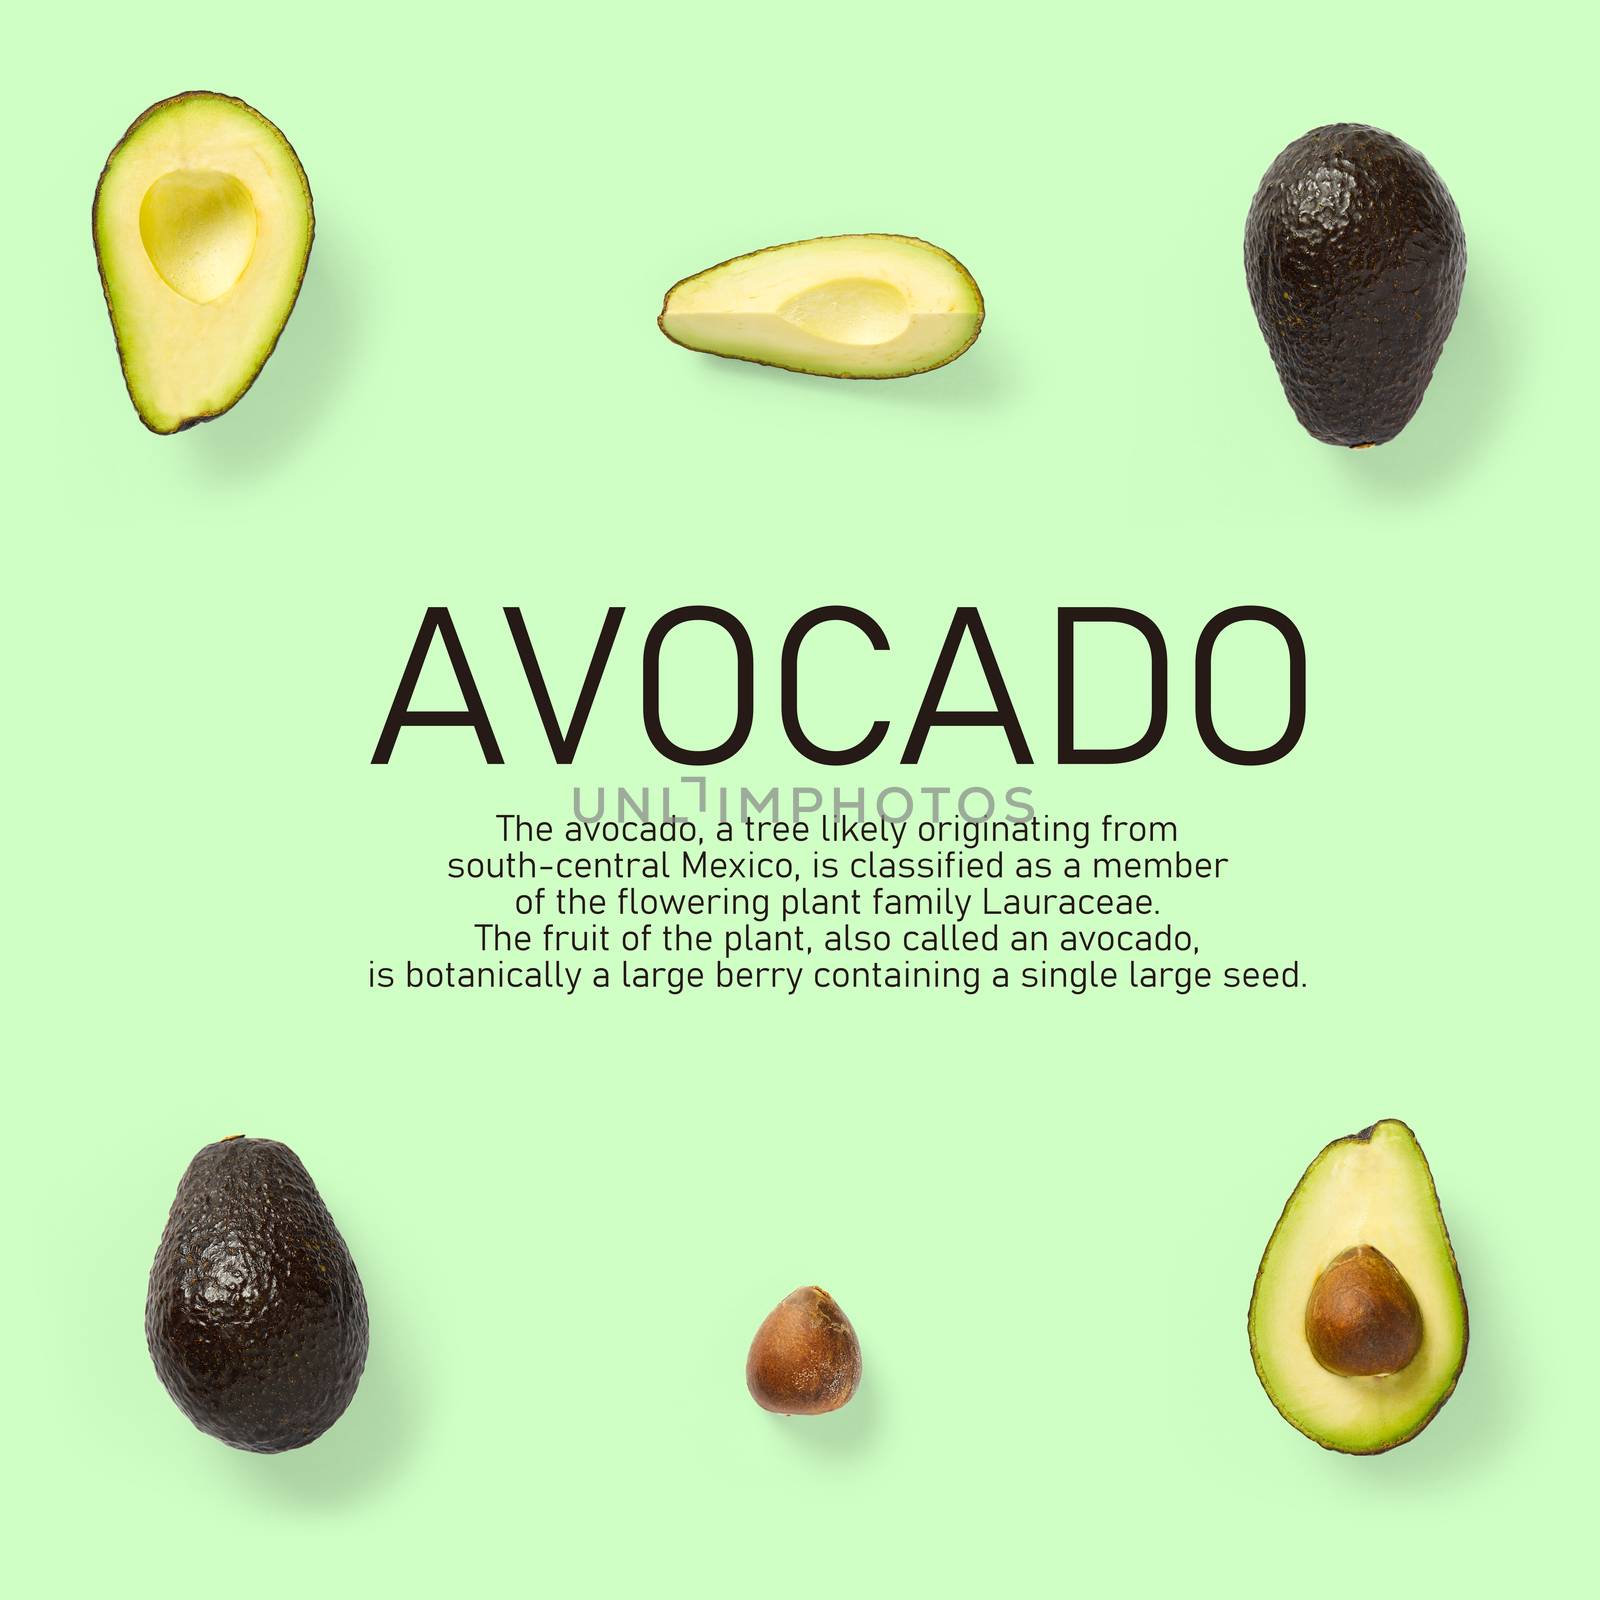 Modern creative avocado collage with simple text on solid color background. Avocado slices creative layout on Green background. Flat lay, Design elements, Food concept